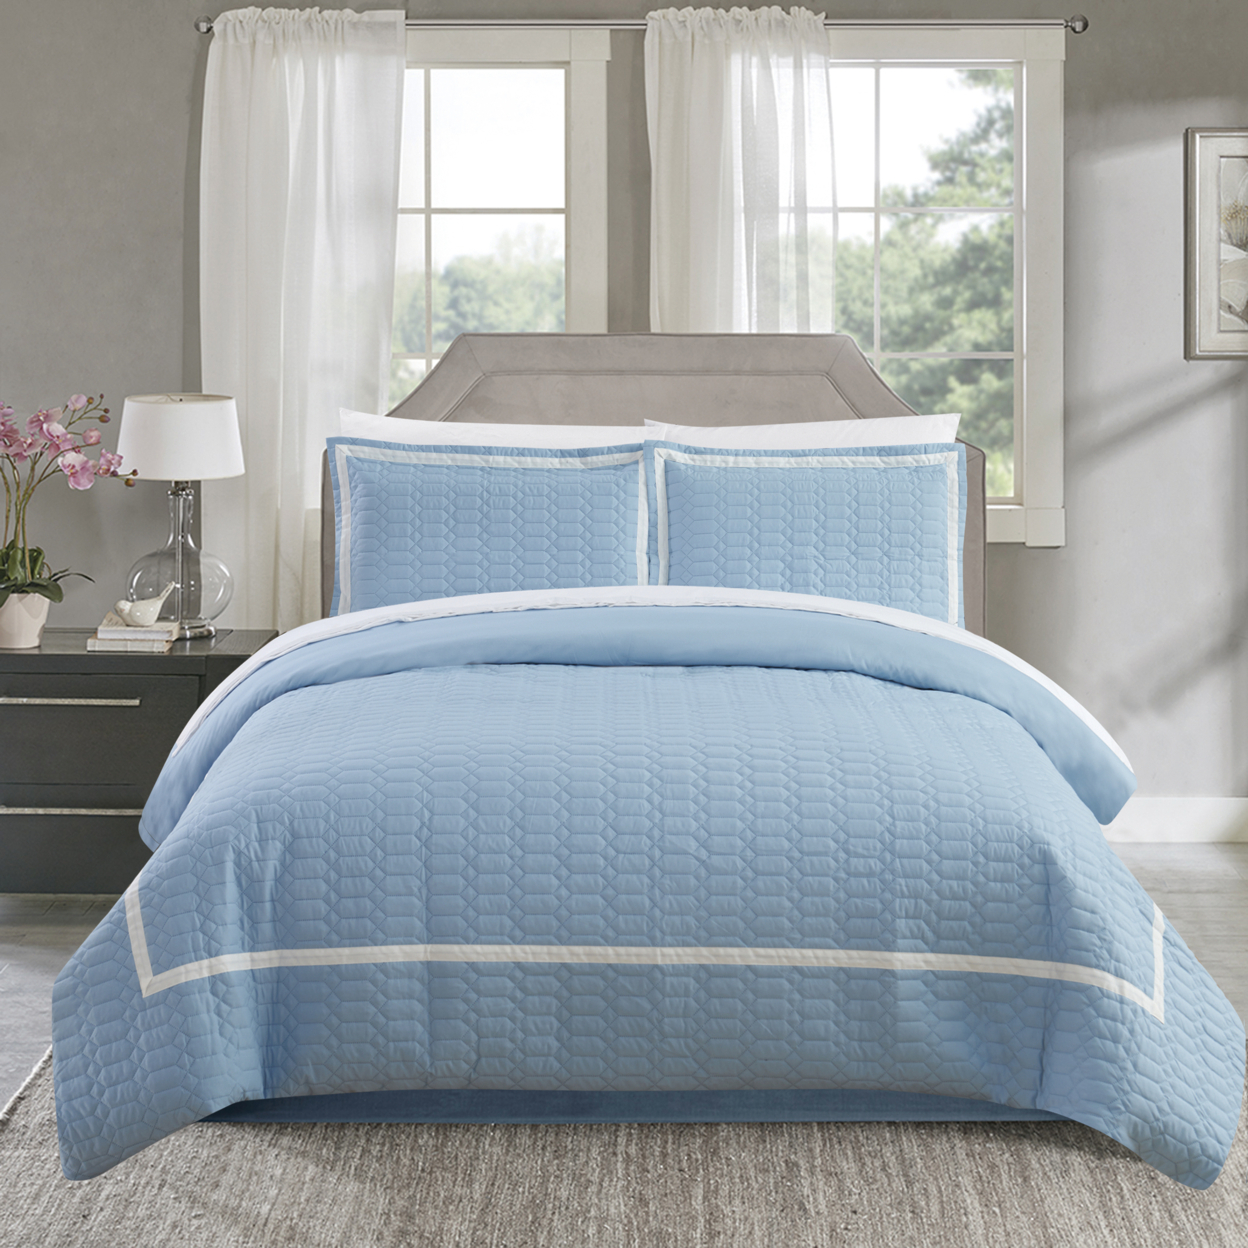 Dawn 2 Piece Duvet Cover Set Hotel Collection Two Tone Banded Print Zipper Closure - Blue, Twin